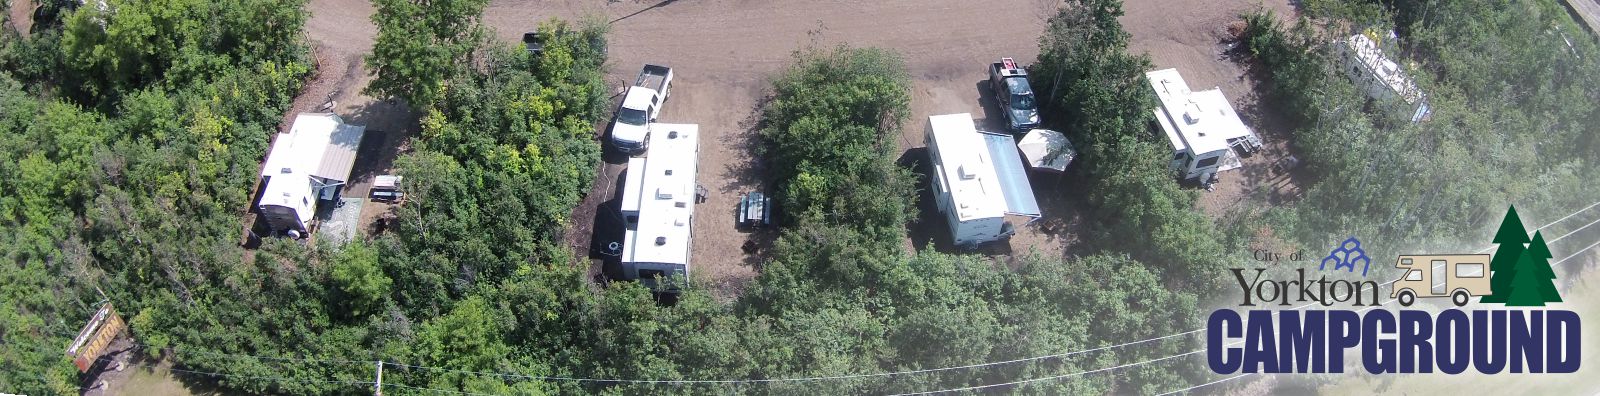 vehicles parked in campground